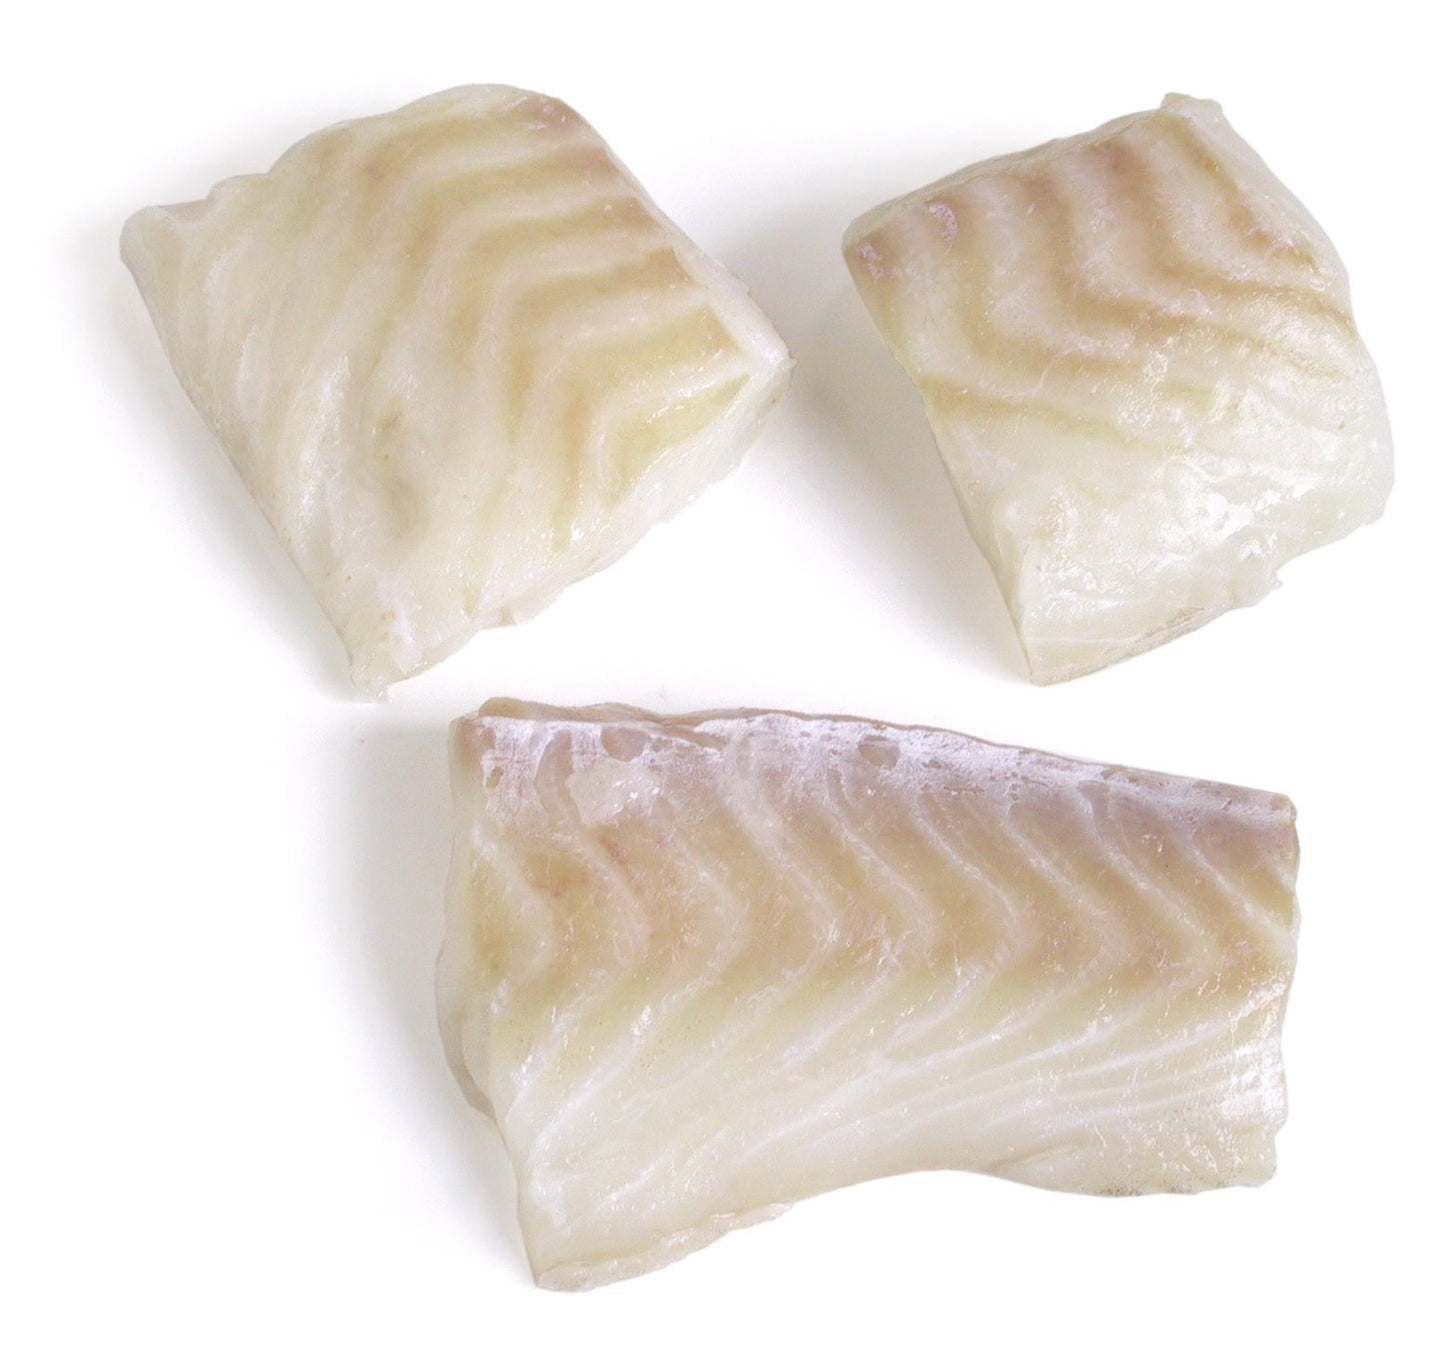 Icelandic cod fillets in portions. Packed in 1 kg bag (approx. 2 lbs). Skinless and boneless. Shipped frozen to ensure top quality on arrival.